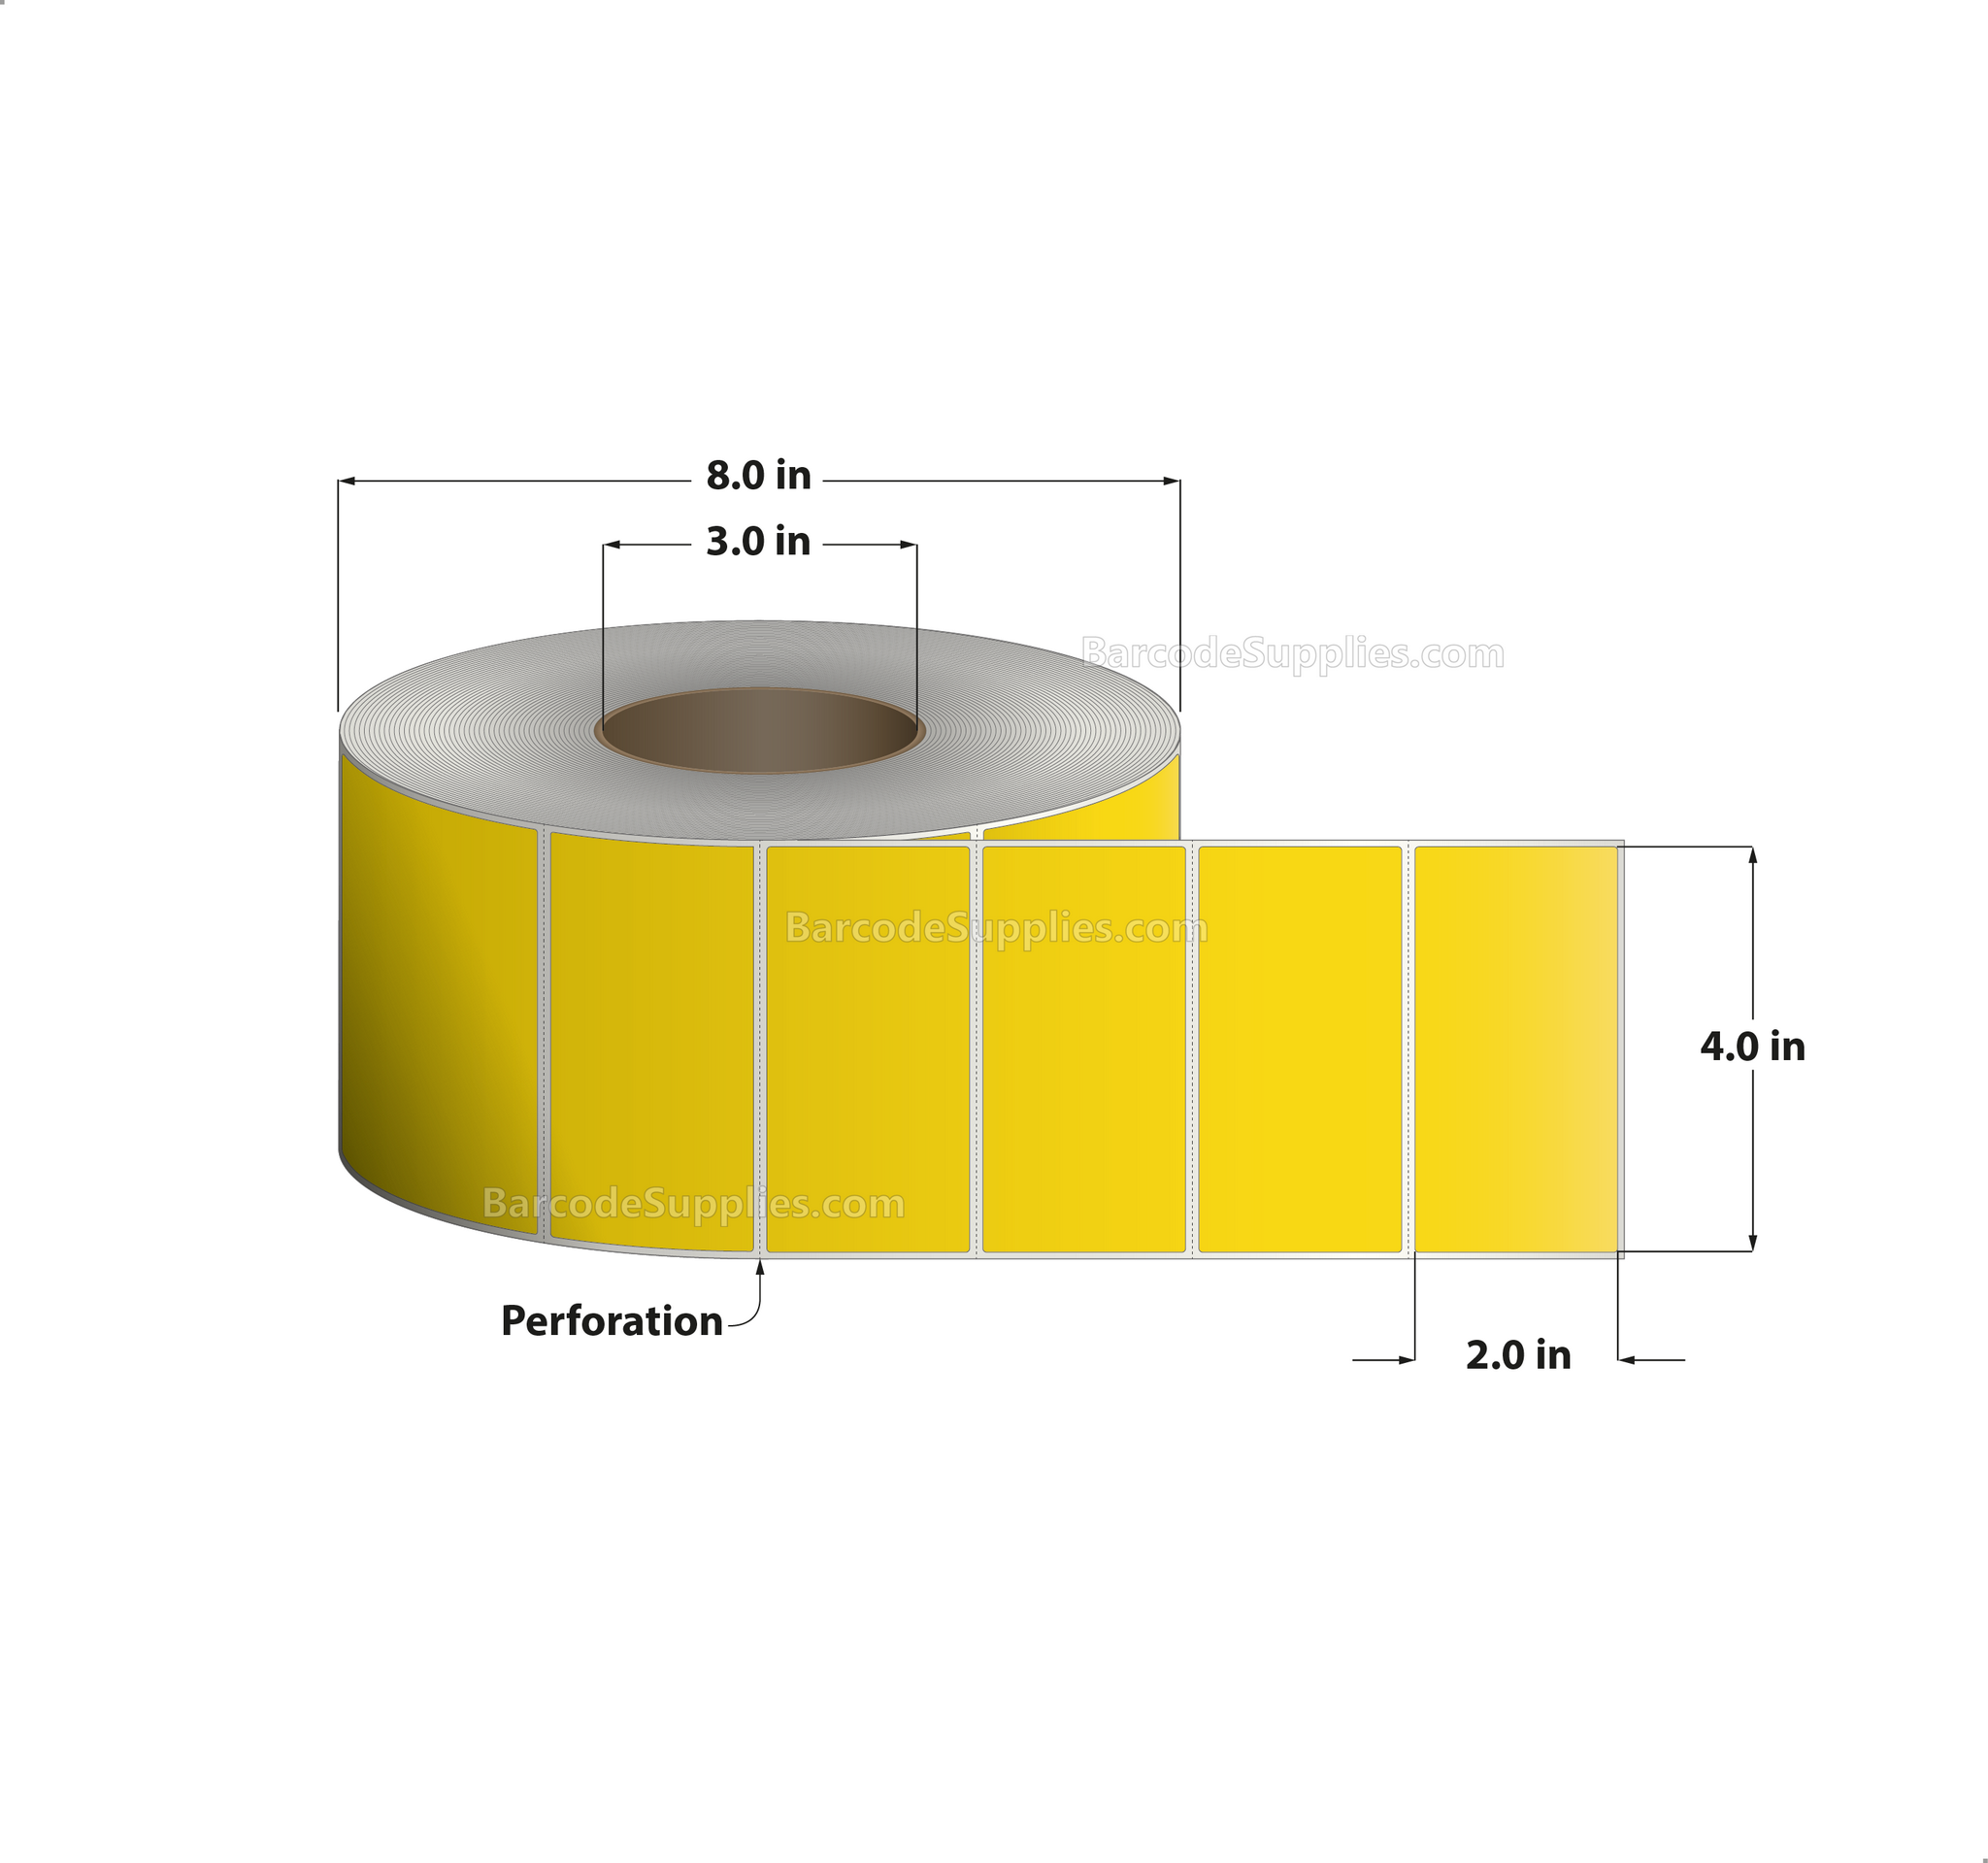 4 x 2 Thermal Transfer Pantone Yellow Labels With Permanent Adhesive - Perforated - 2900 Labels Per Roll - Carton Of 4 Rolls - 11600 Labels Total - MPN: RFC-4-2-2900-YL